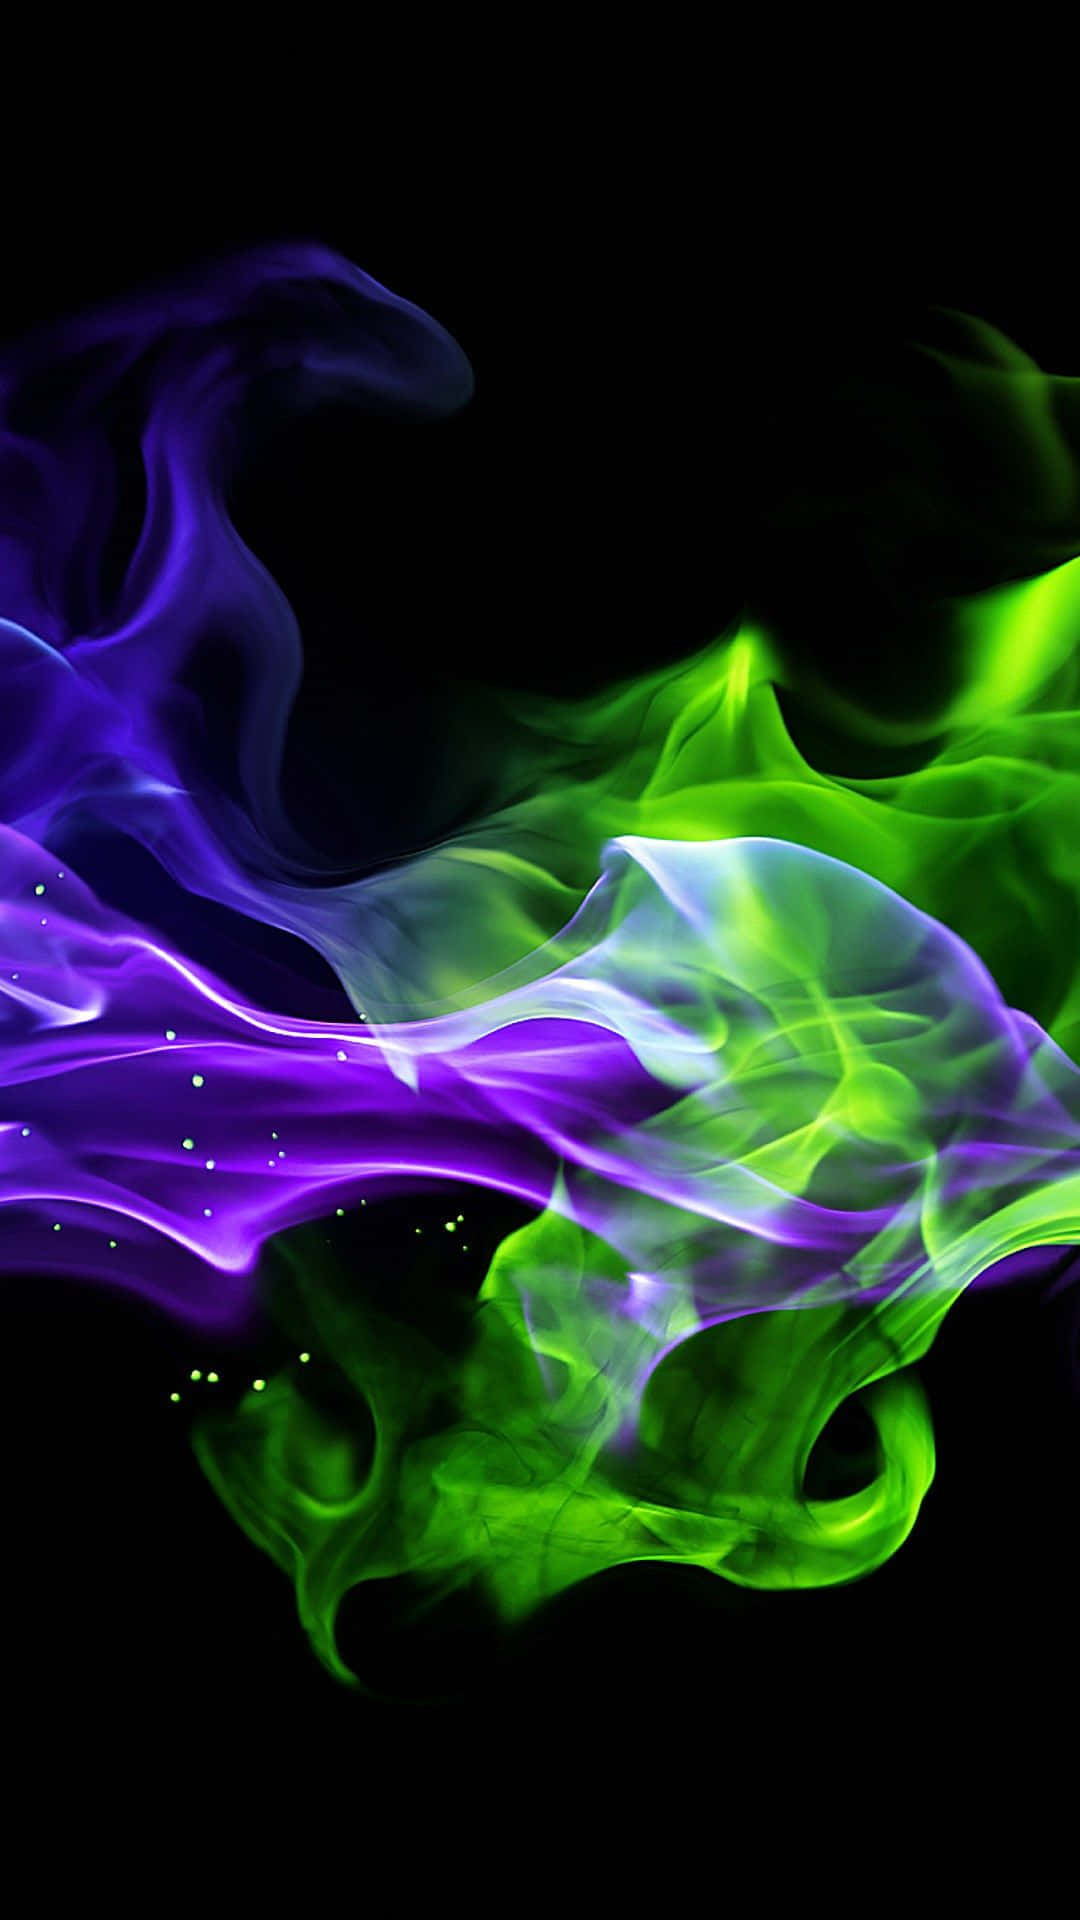 Bright neon green and purple colors against a dark backdrop create a balanced and eye-catching image. Wallpaper